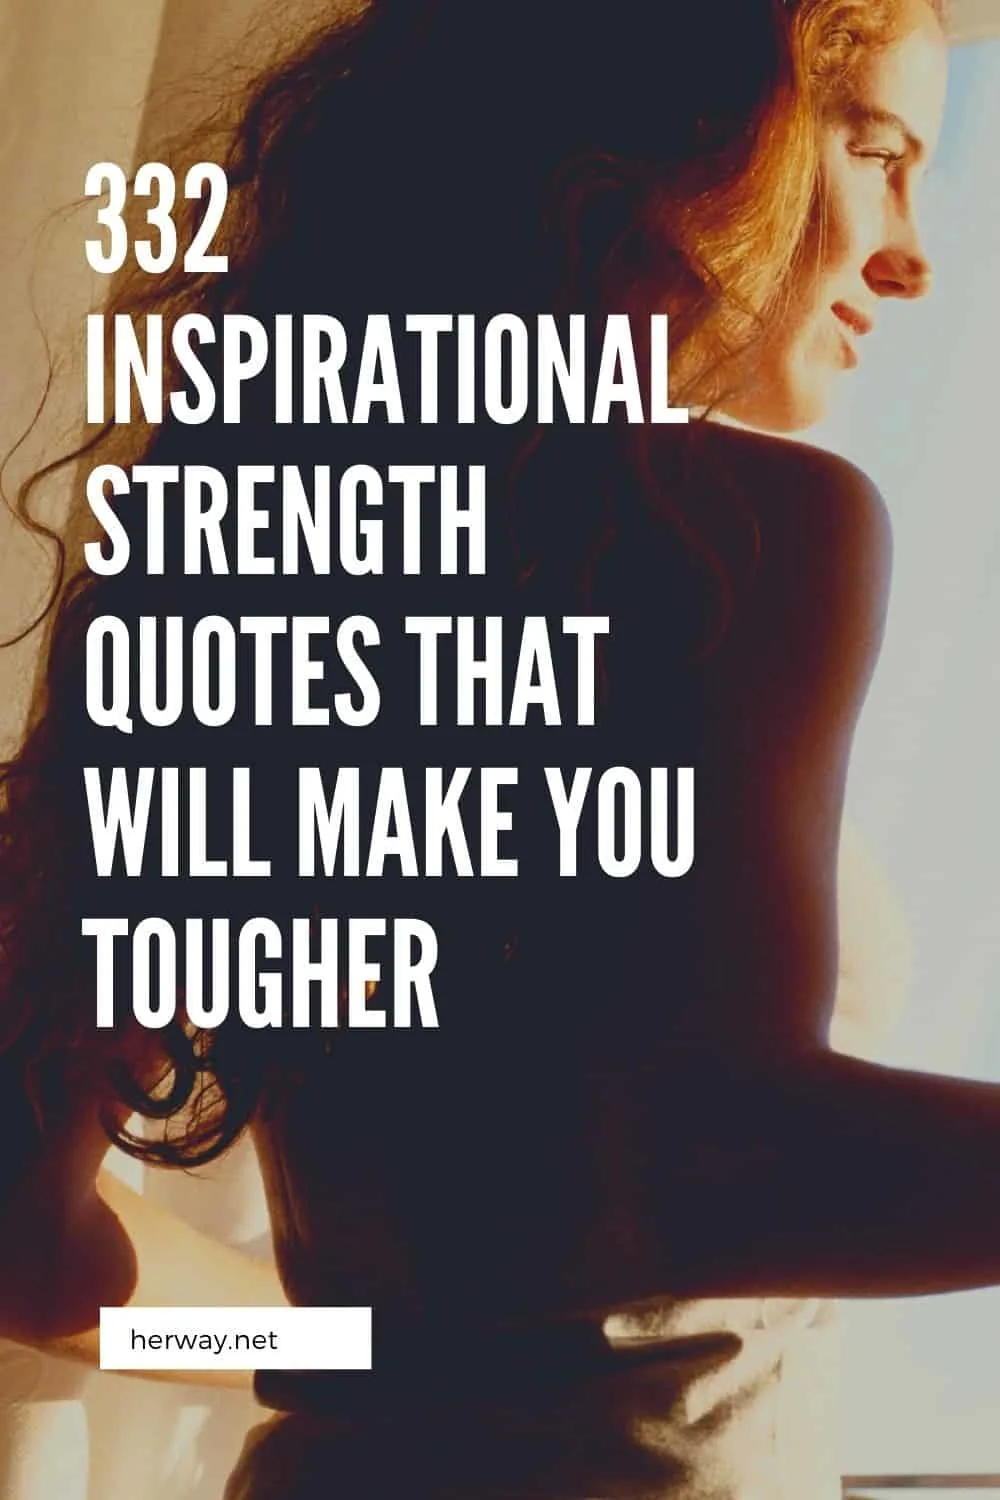 332 Inspirational Strength Quotes That Will Make You Tougher